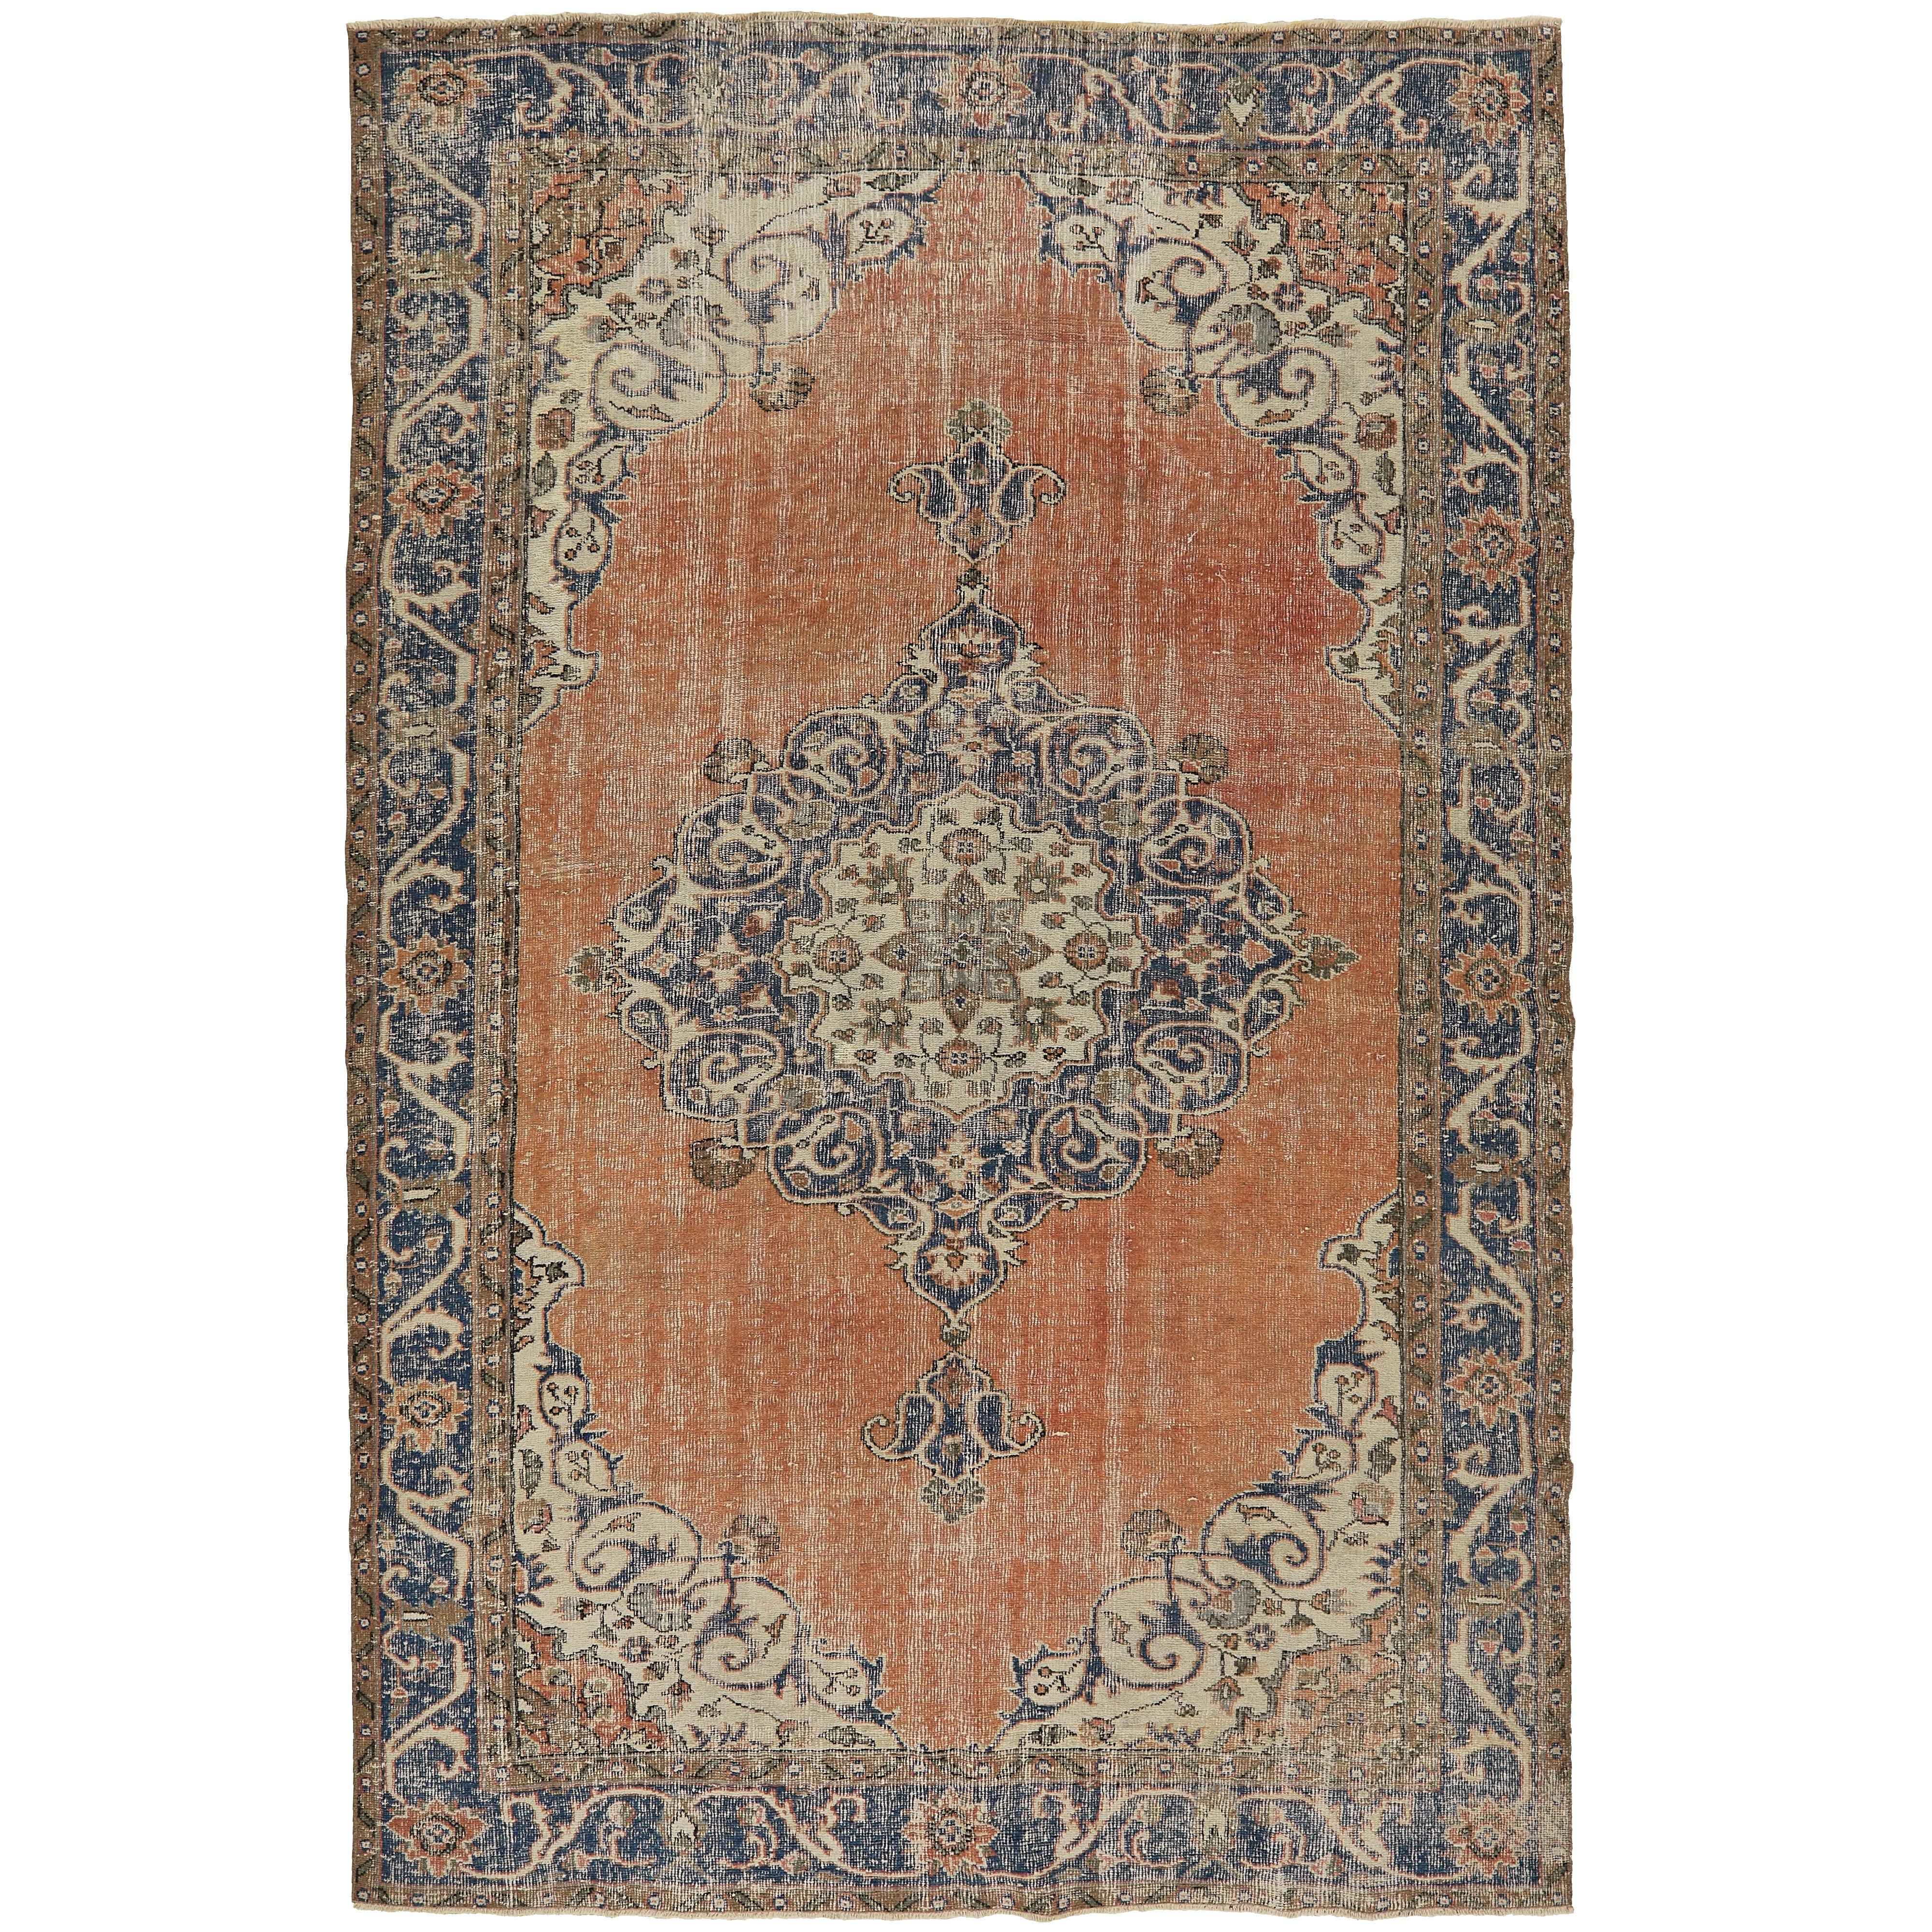 Moira - Turkish Rug Excellence Defined